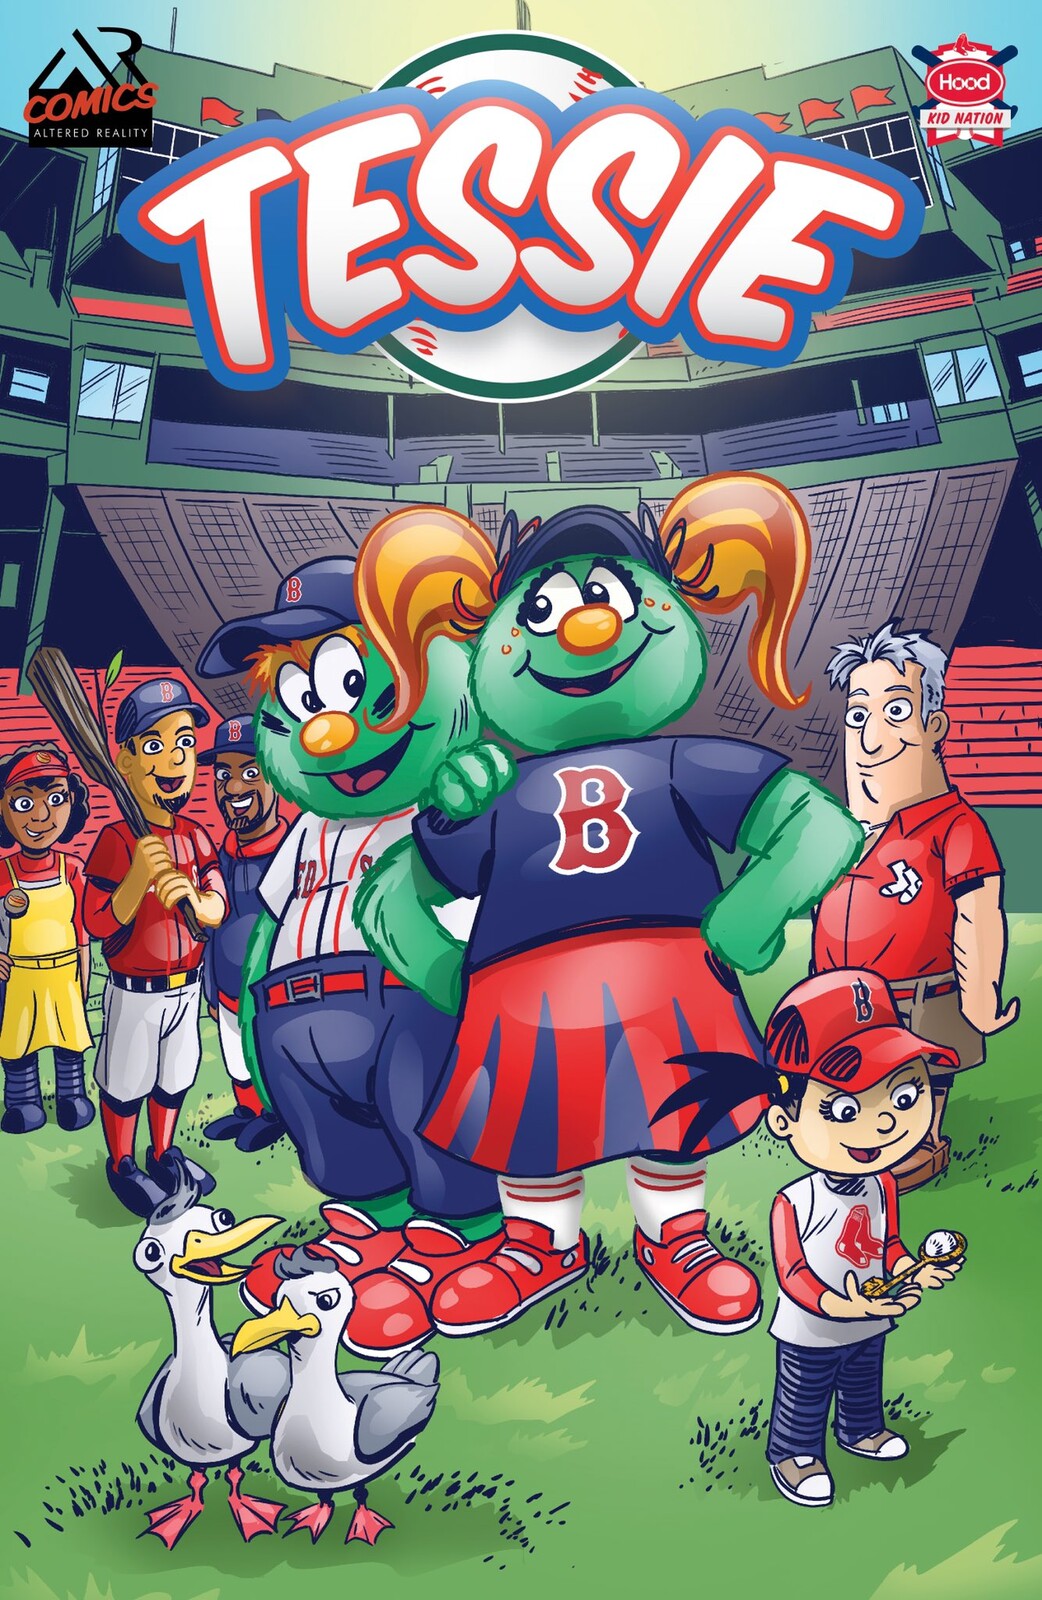 Cover for Tessie. Published by the Boston Red Sox in partnership with Altered Reality Entertainment.